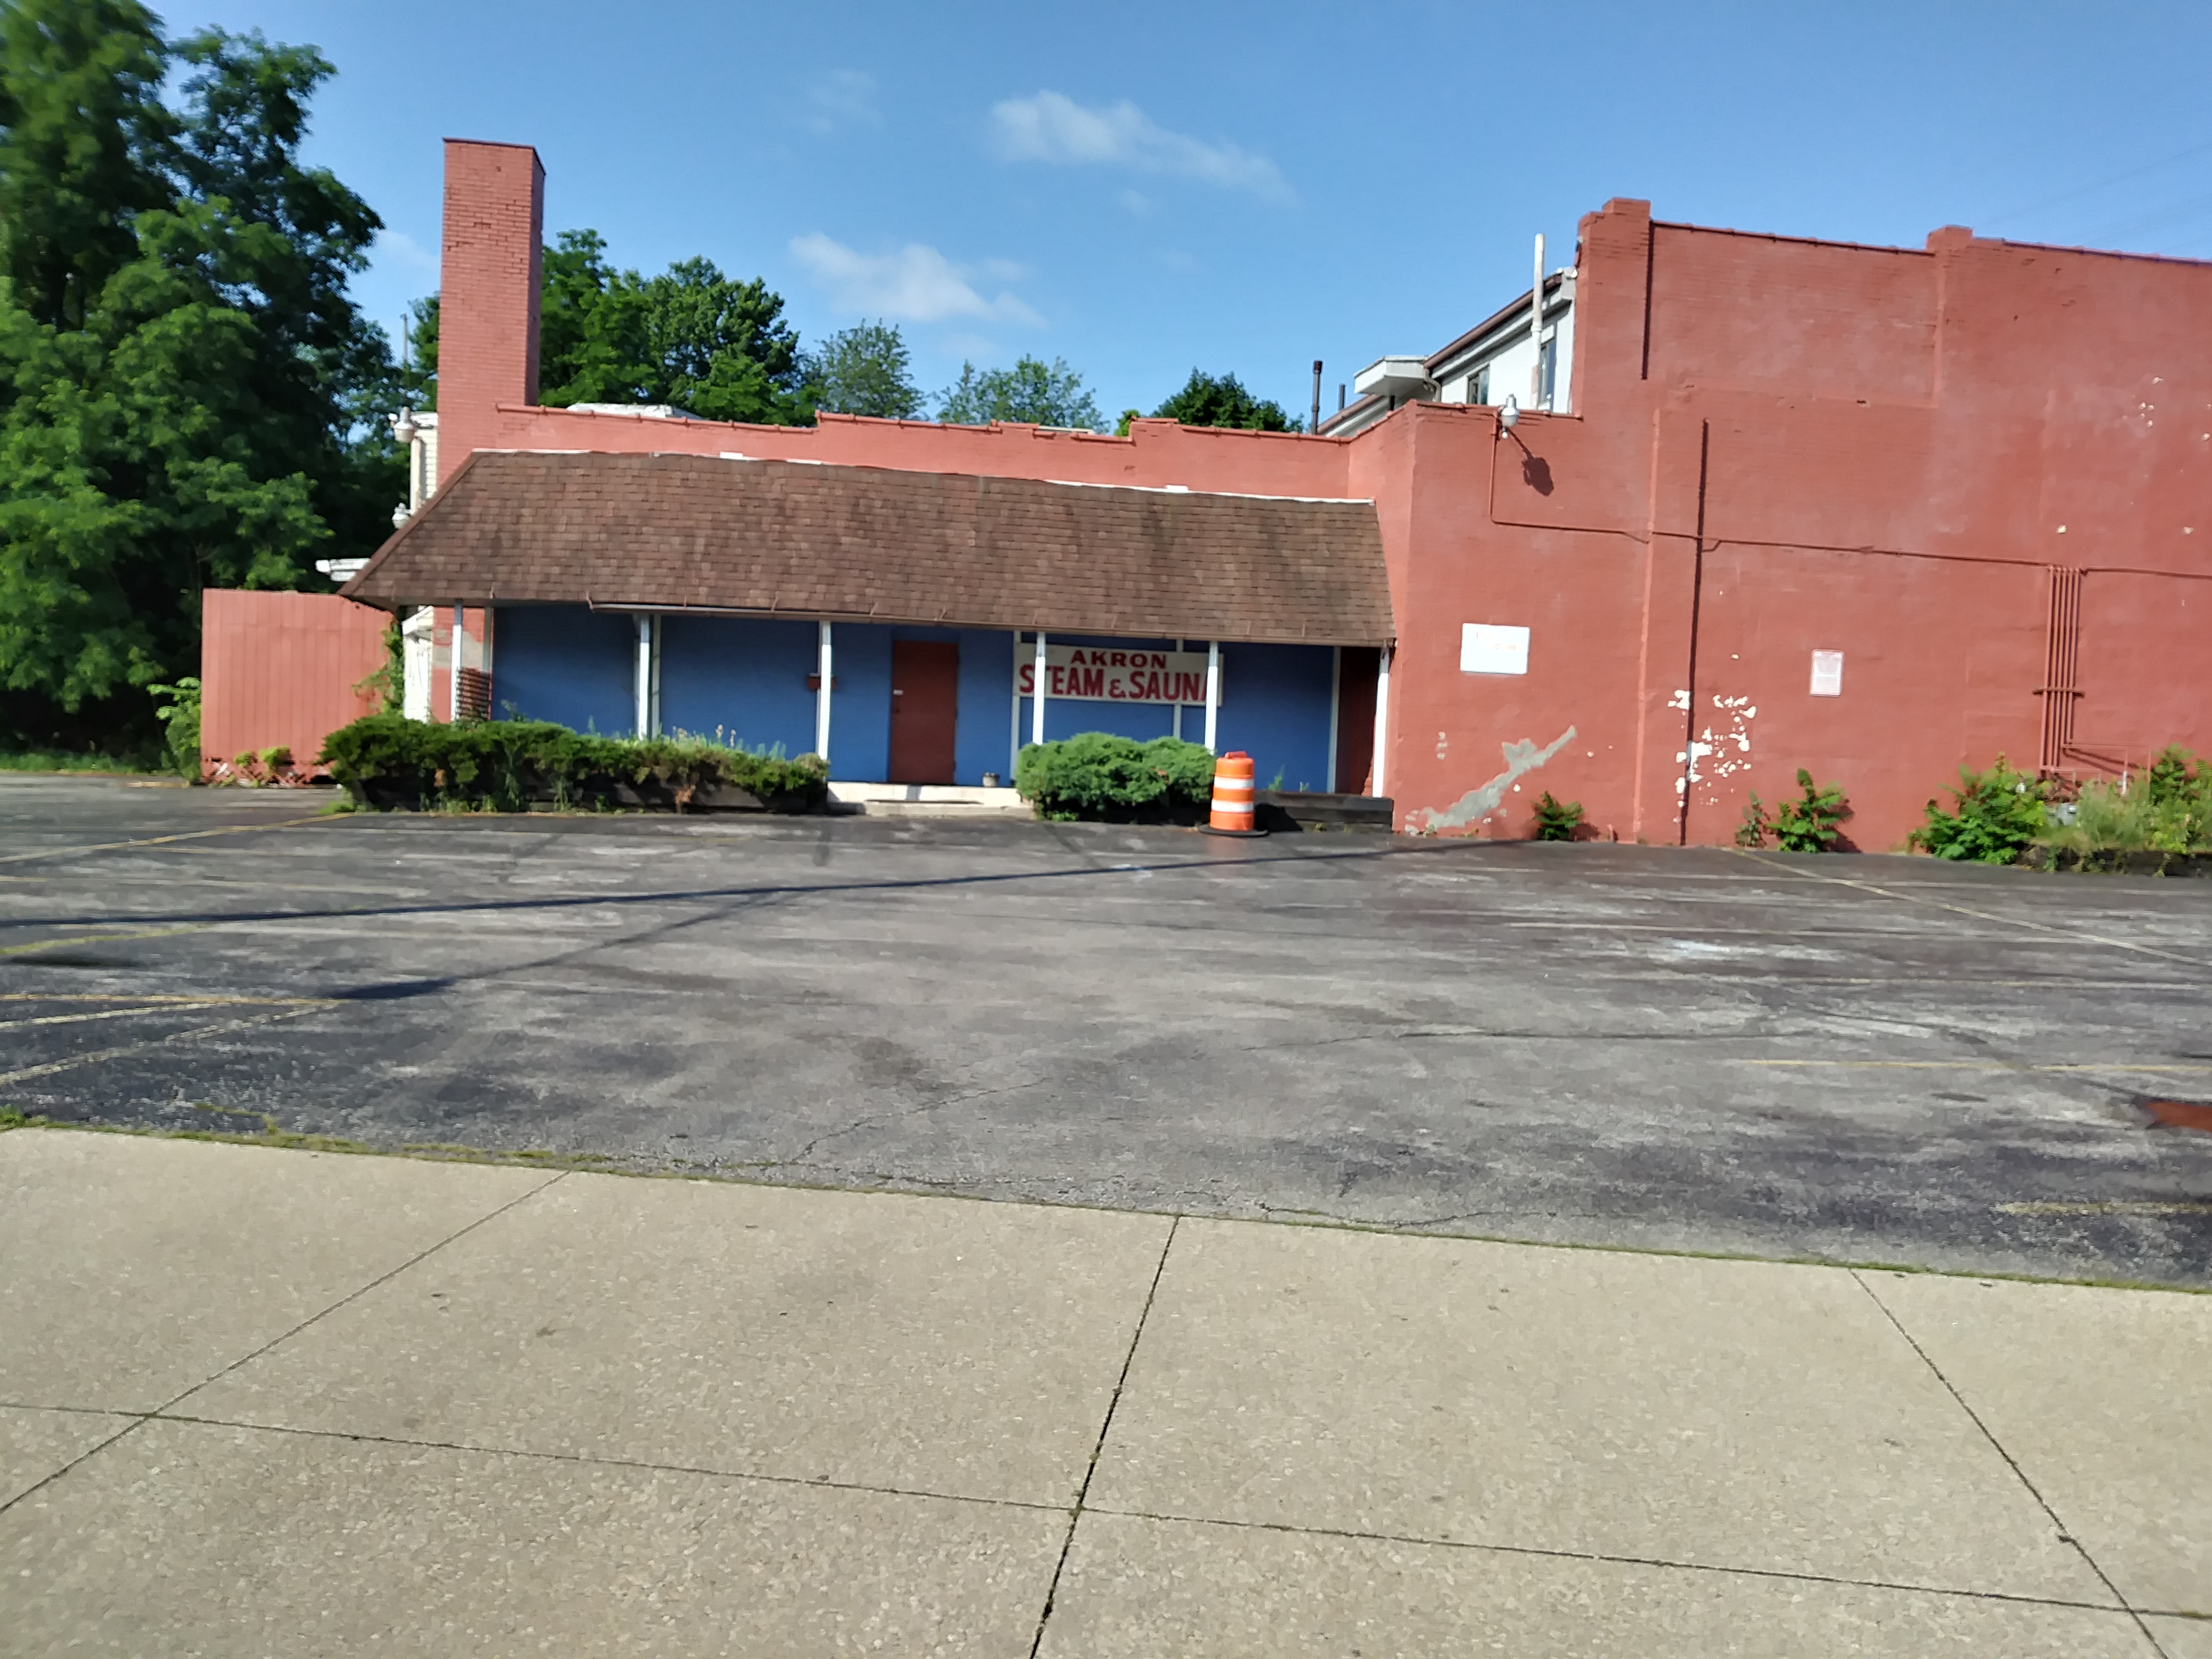 Photo of Akron Steam and Sauna